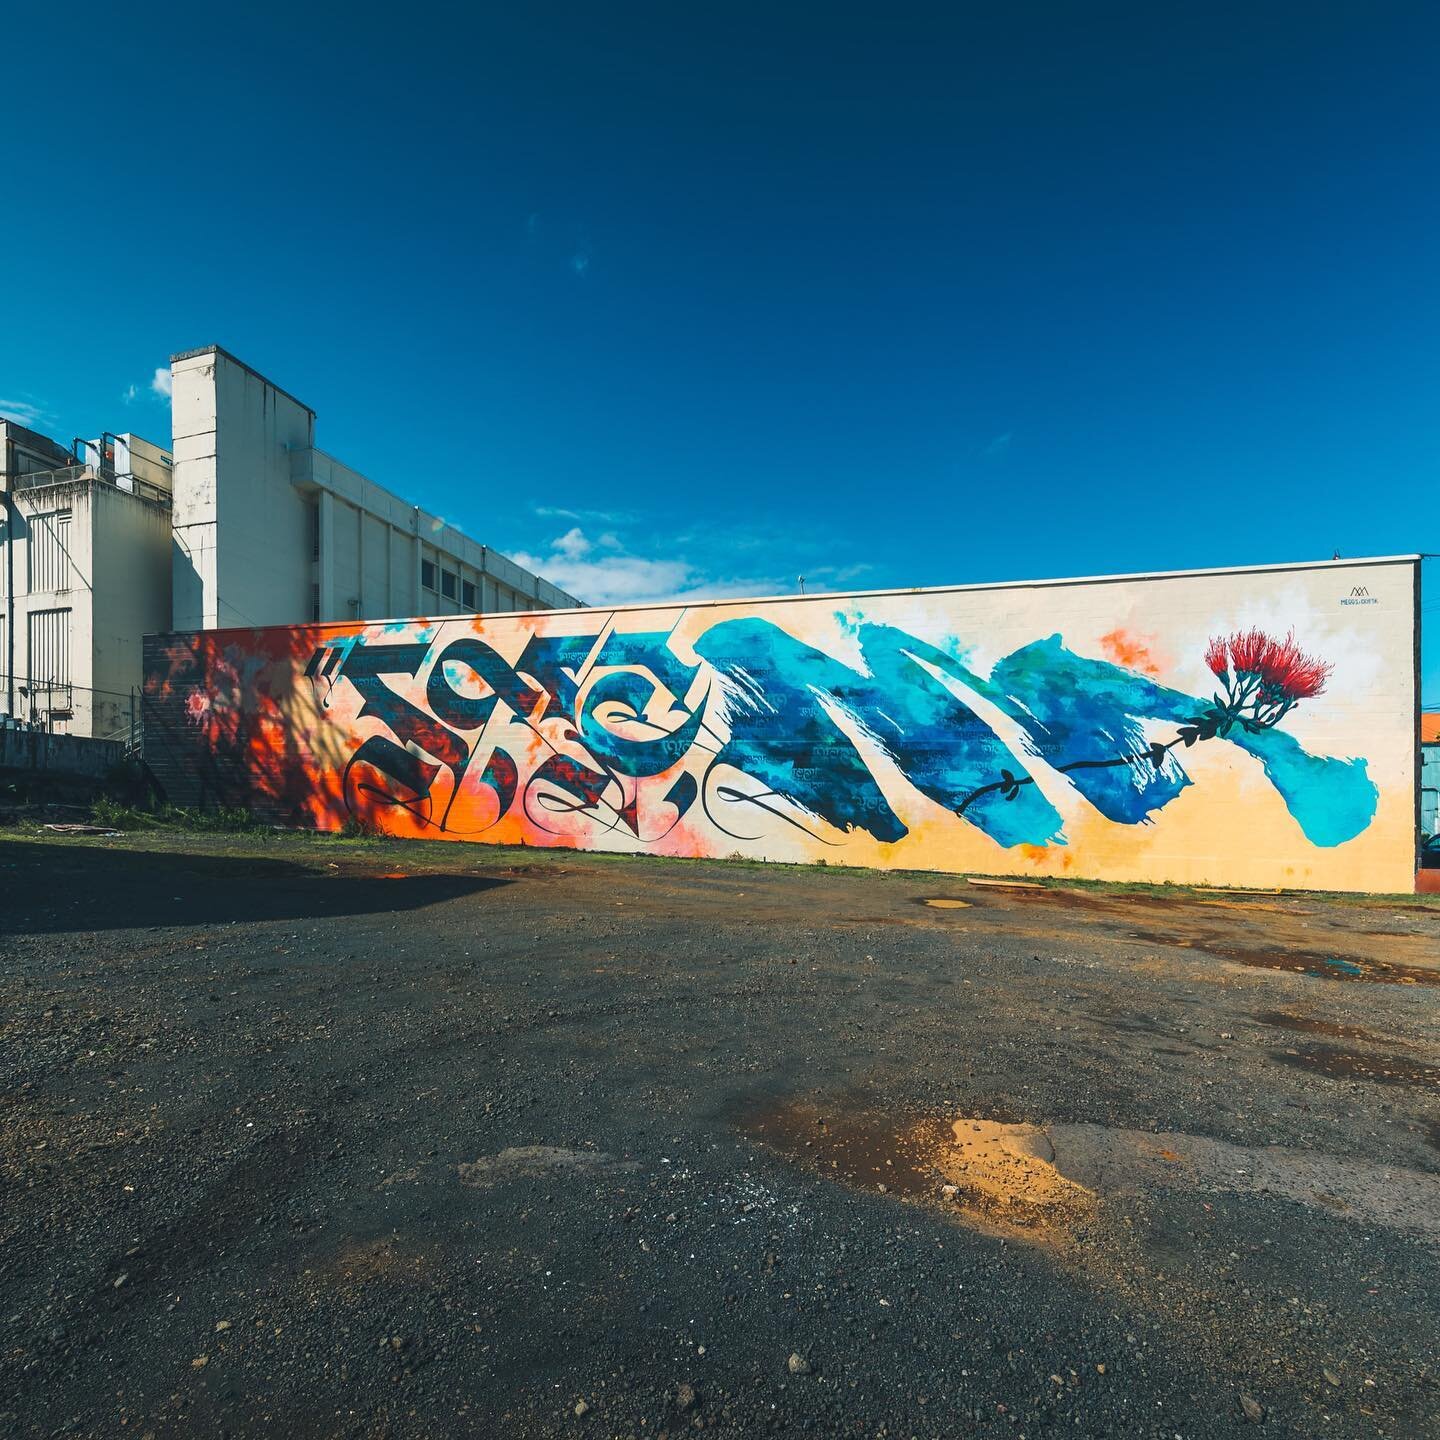 I&rsquo;m reminded today of the &lsquo;MANA&rsquo; collaborative mural I painted with the homie @_cryptik_ in Hilo, Hawai&rsquo;i with @templechildren .
.
This project will remain one of my all time favs as much for the result as for the connection i